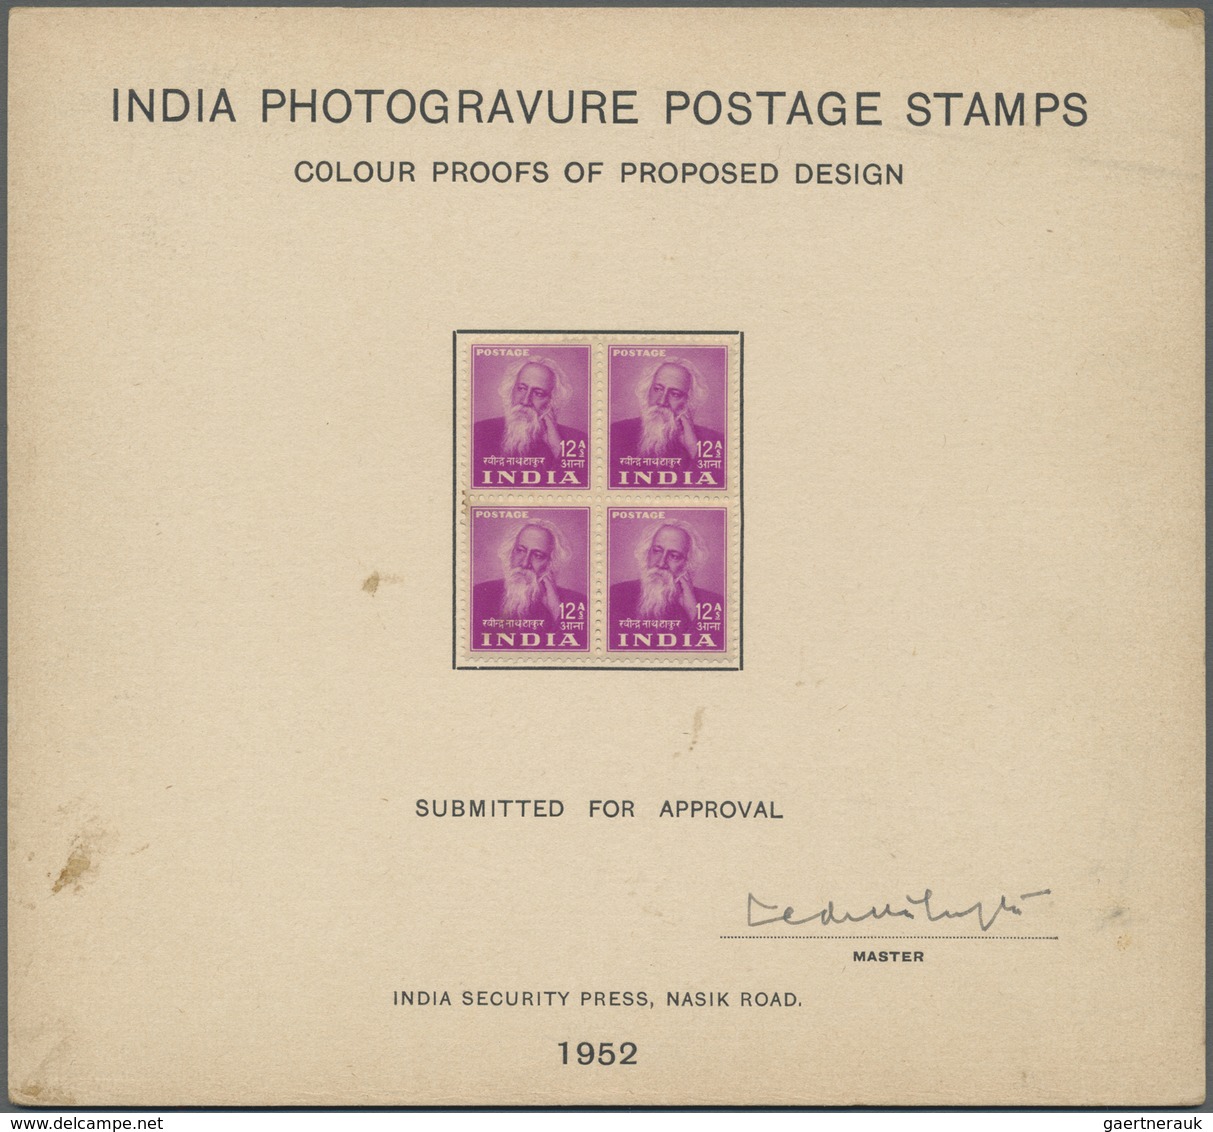 (*) Indien: 1952 "SAINTS & POETS": Collection of 17 COLOUR PROOFS & ESSAYS OF PROPOSED DESIGN each in bl